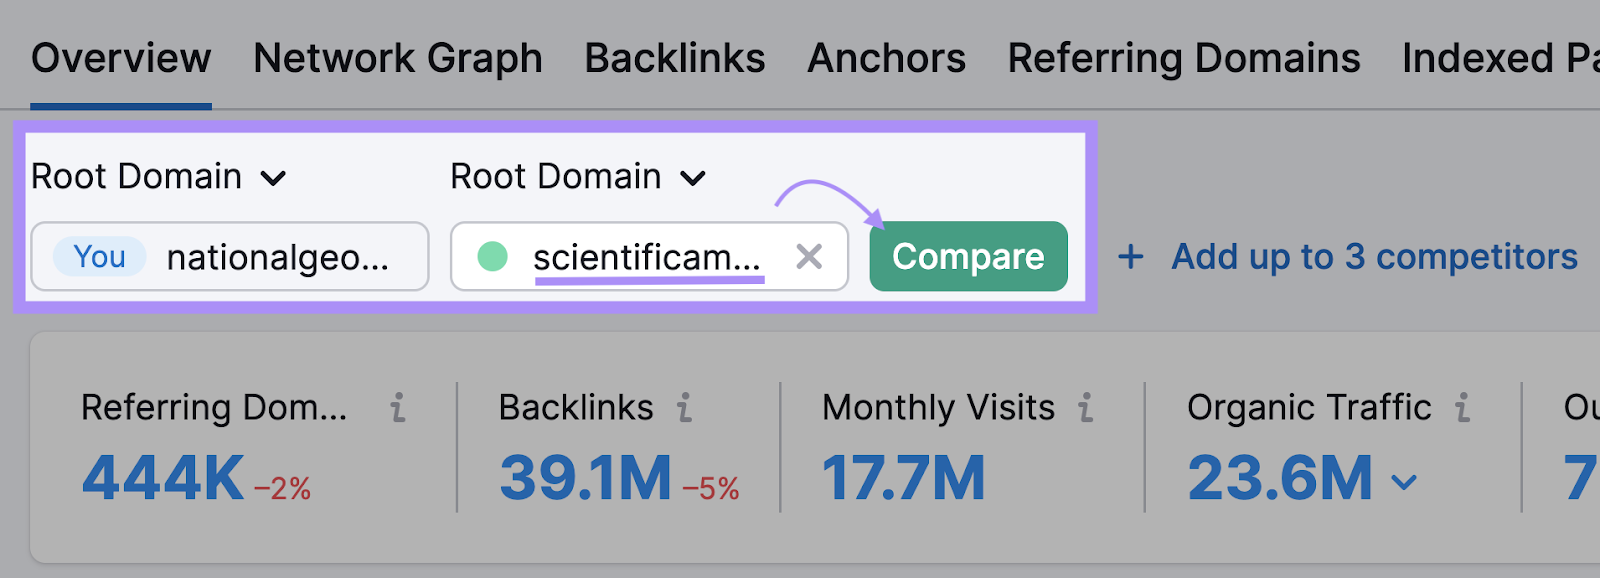 Adding competitors's domains to Backlink Analytics tool